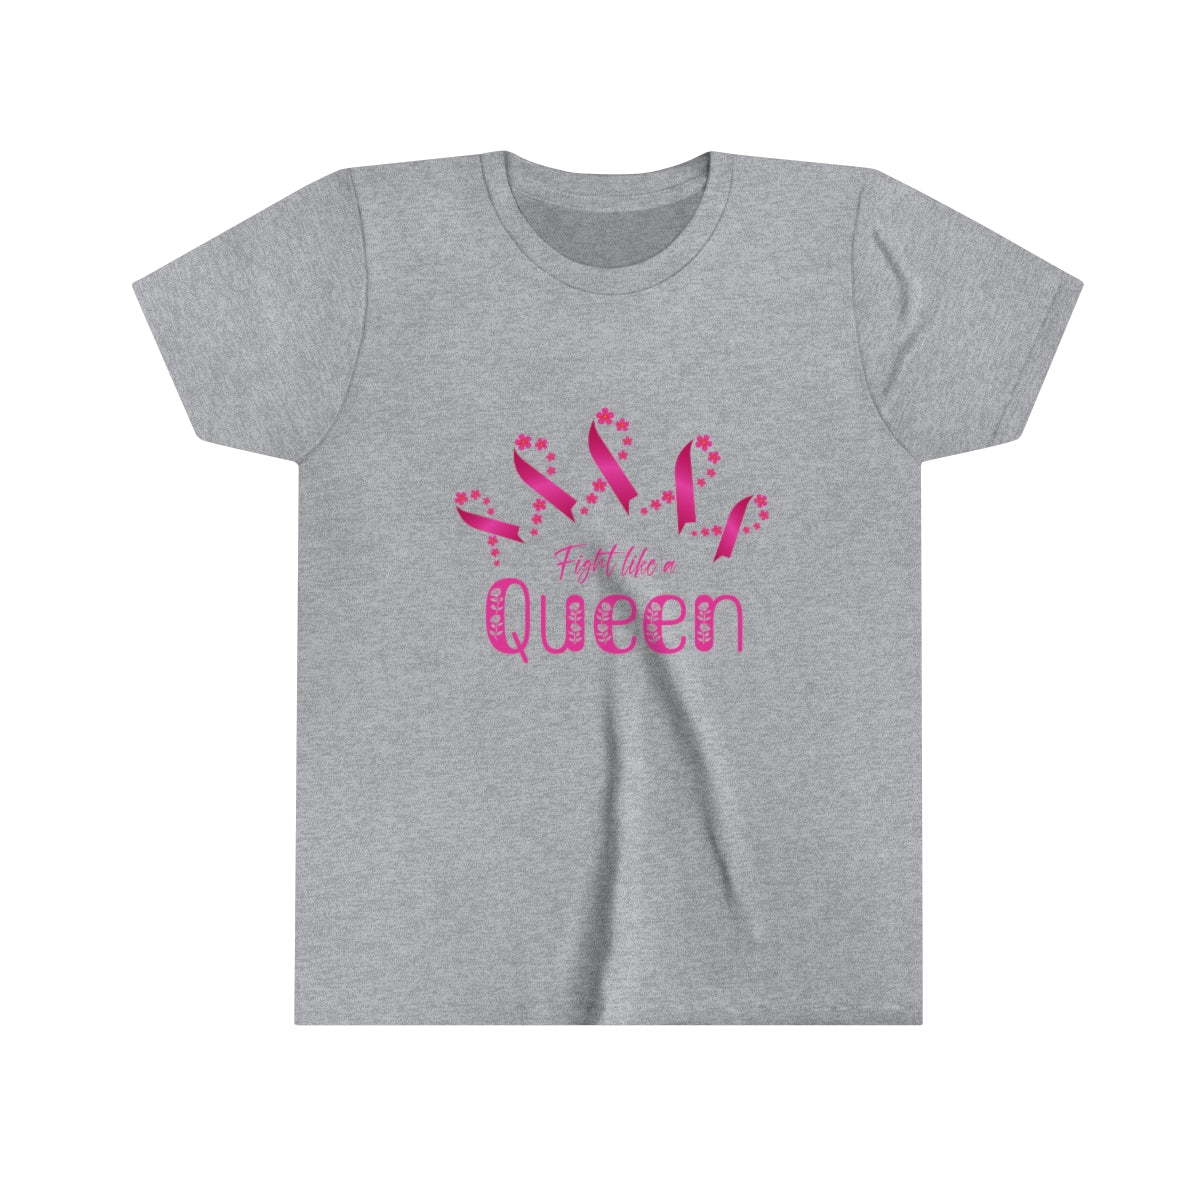 Fight Like a Queen - Youth Tee